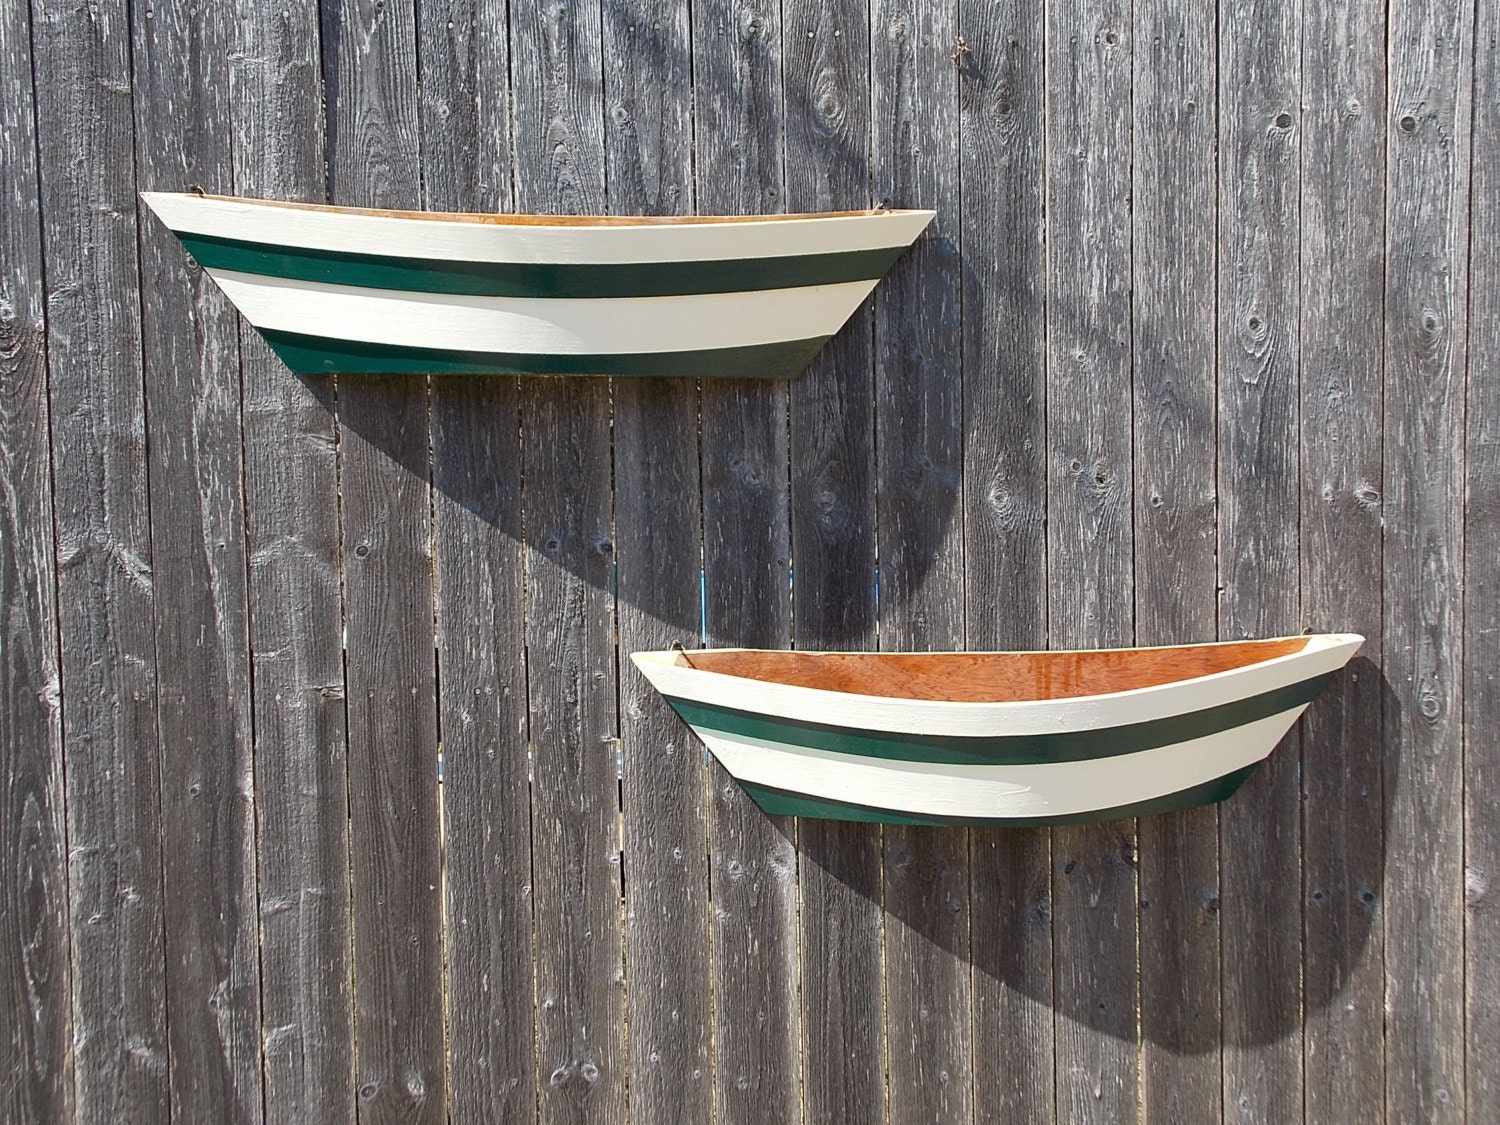 Tld Make: Try Wooden boat shaped planter